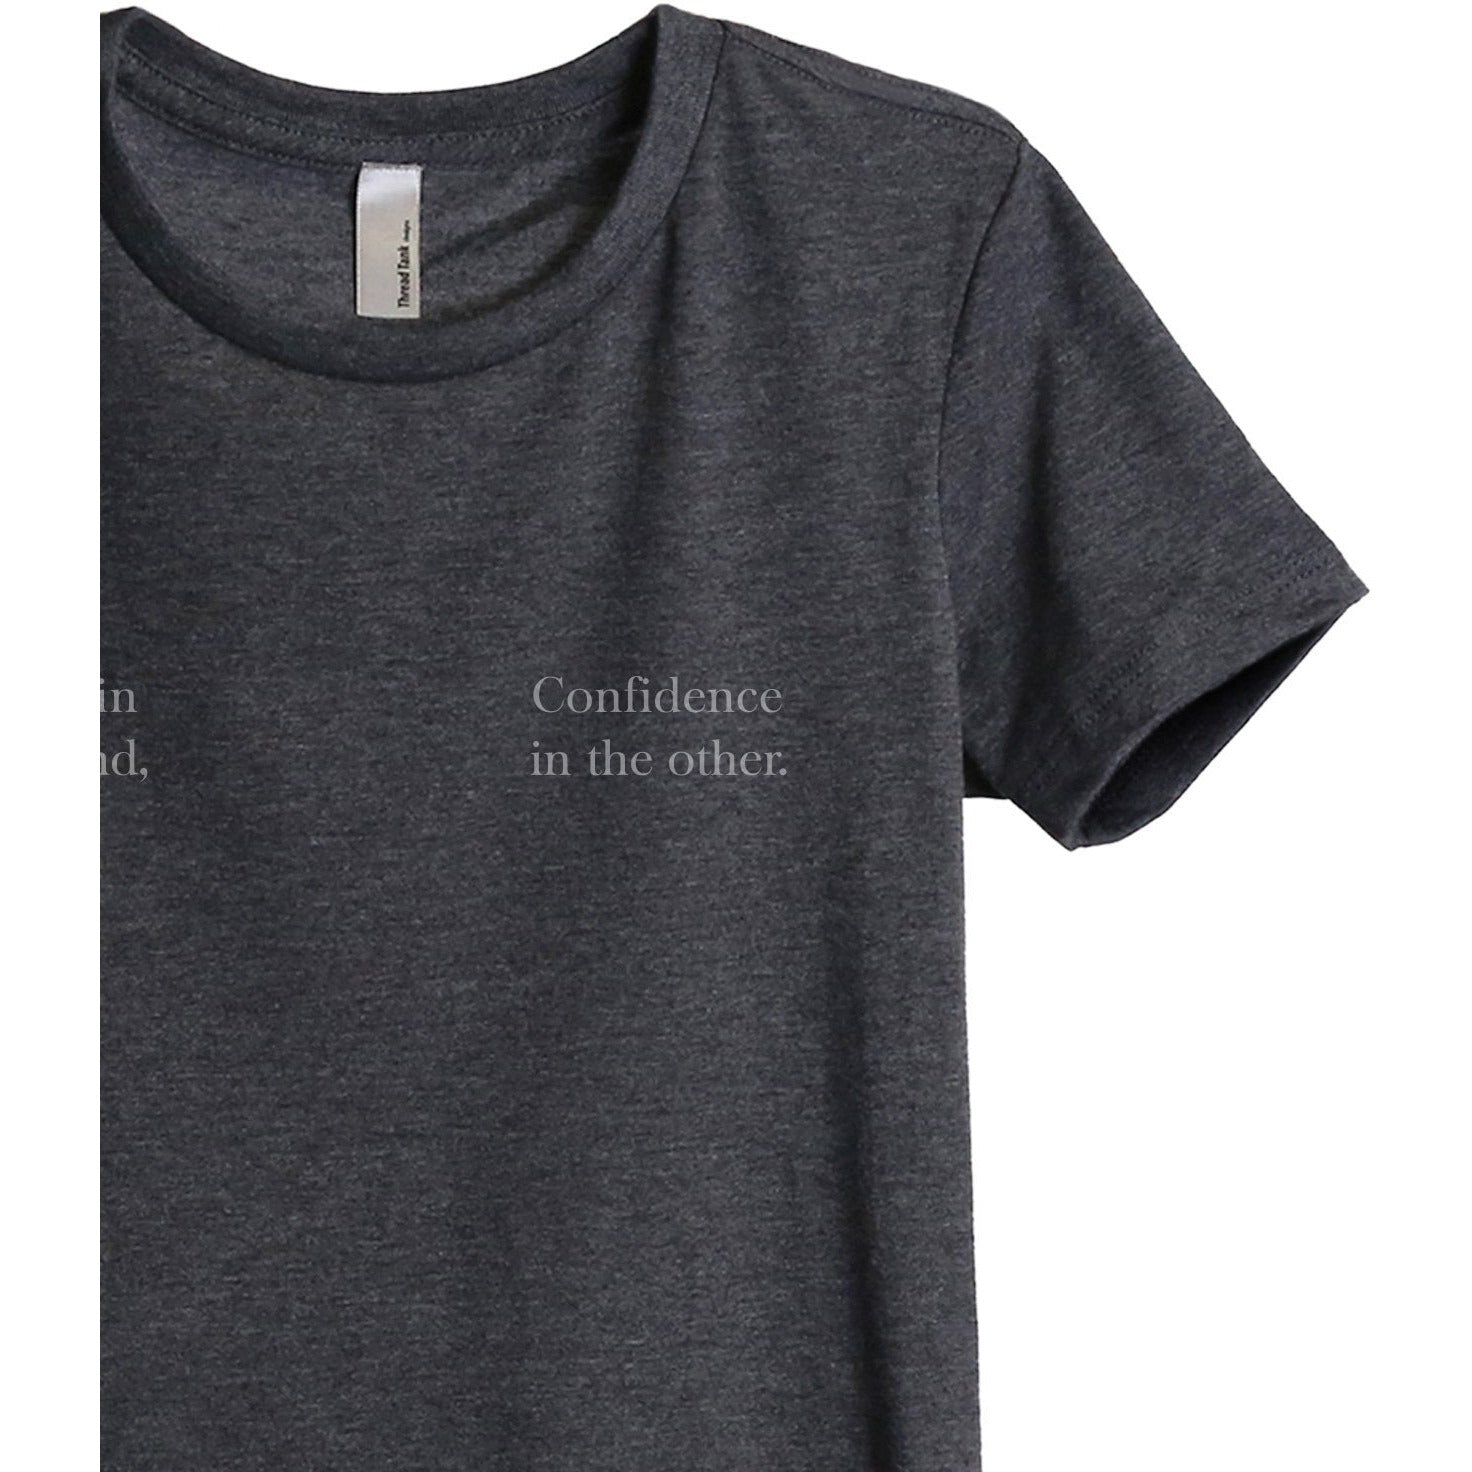 Coffee In One Hand Confidence Other Women's Relaxed Crewneck T-Shirt Top Tee Charcoal Grey Zoom Details